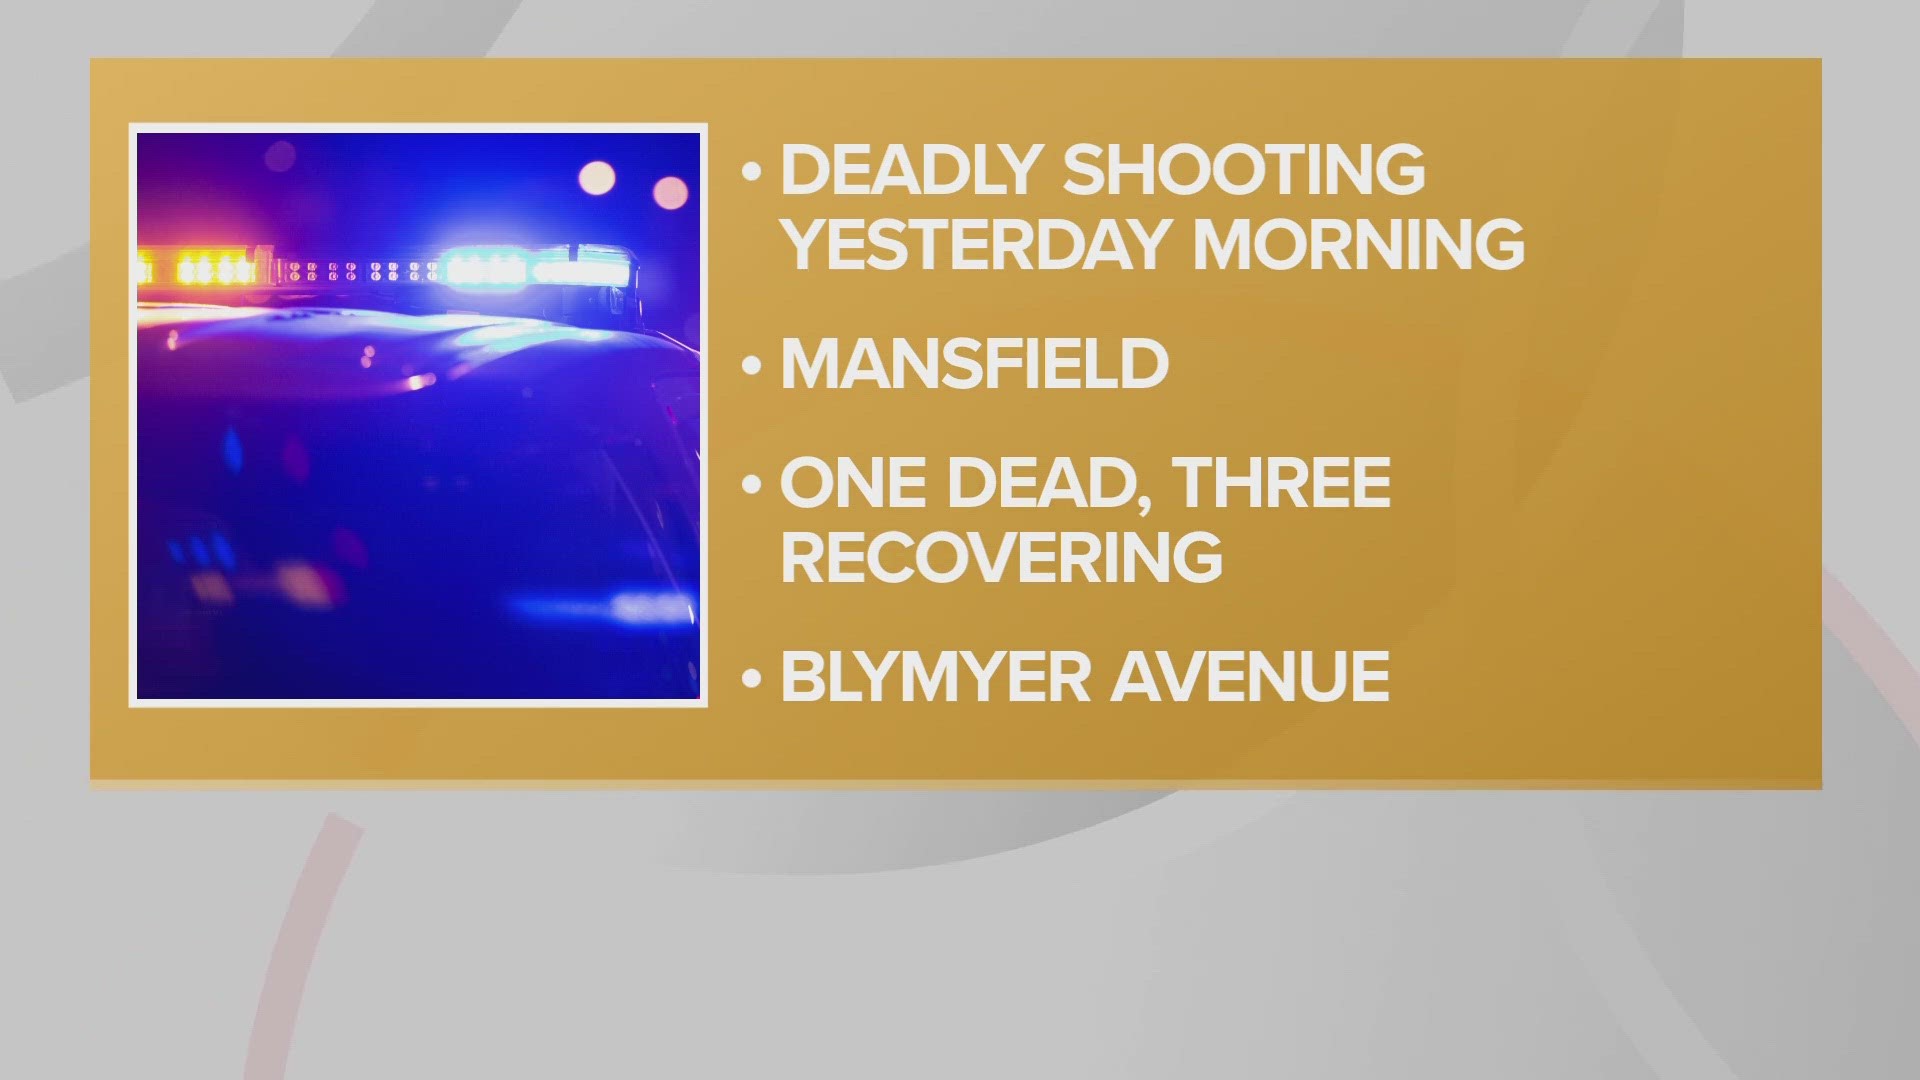 Mansfield police are asking for the public’s help in finding the suspects involved in a shooting that left one person dead and three others hurt Sunday morning.